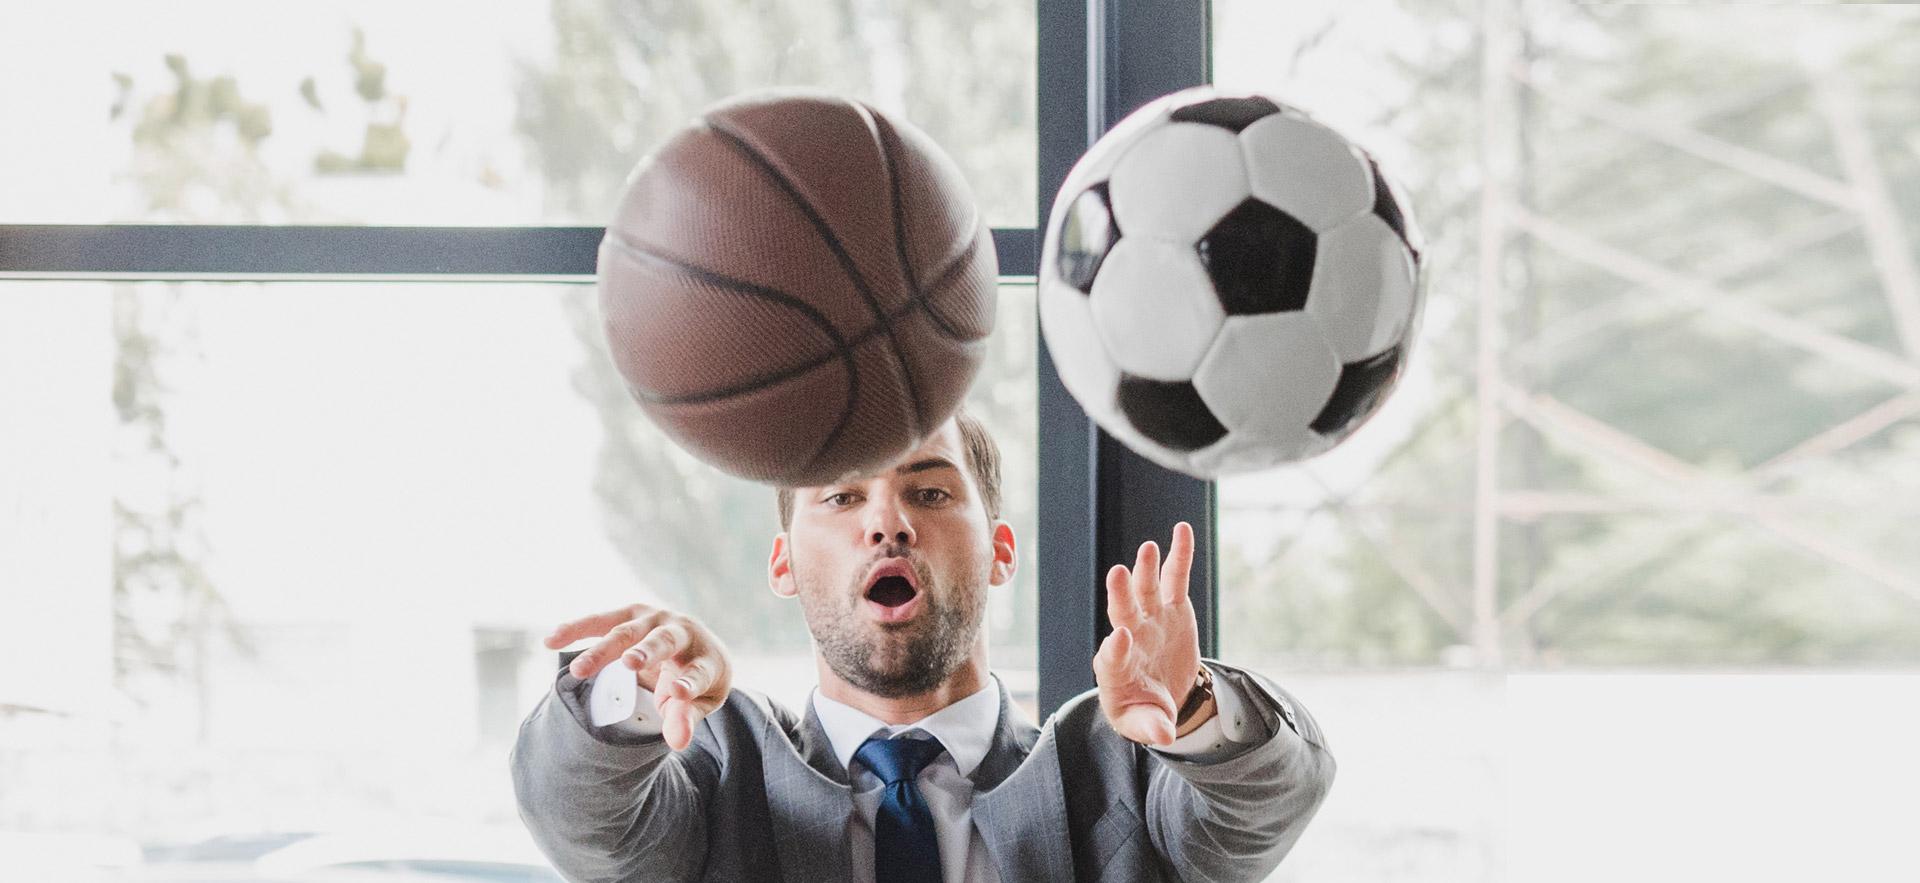 Man sitting at desk in a suit throwing a basketball and soccer ball